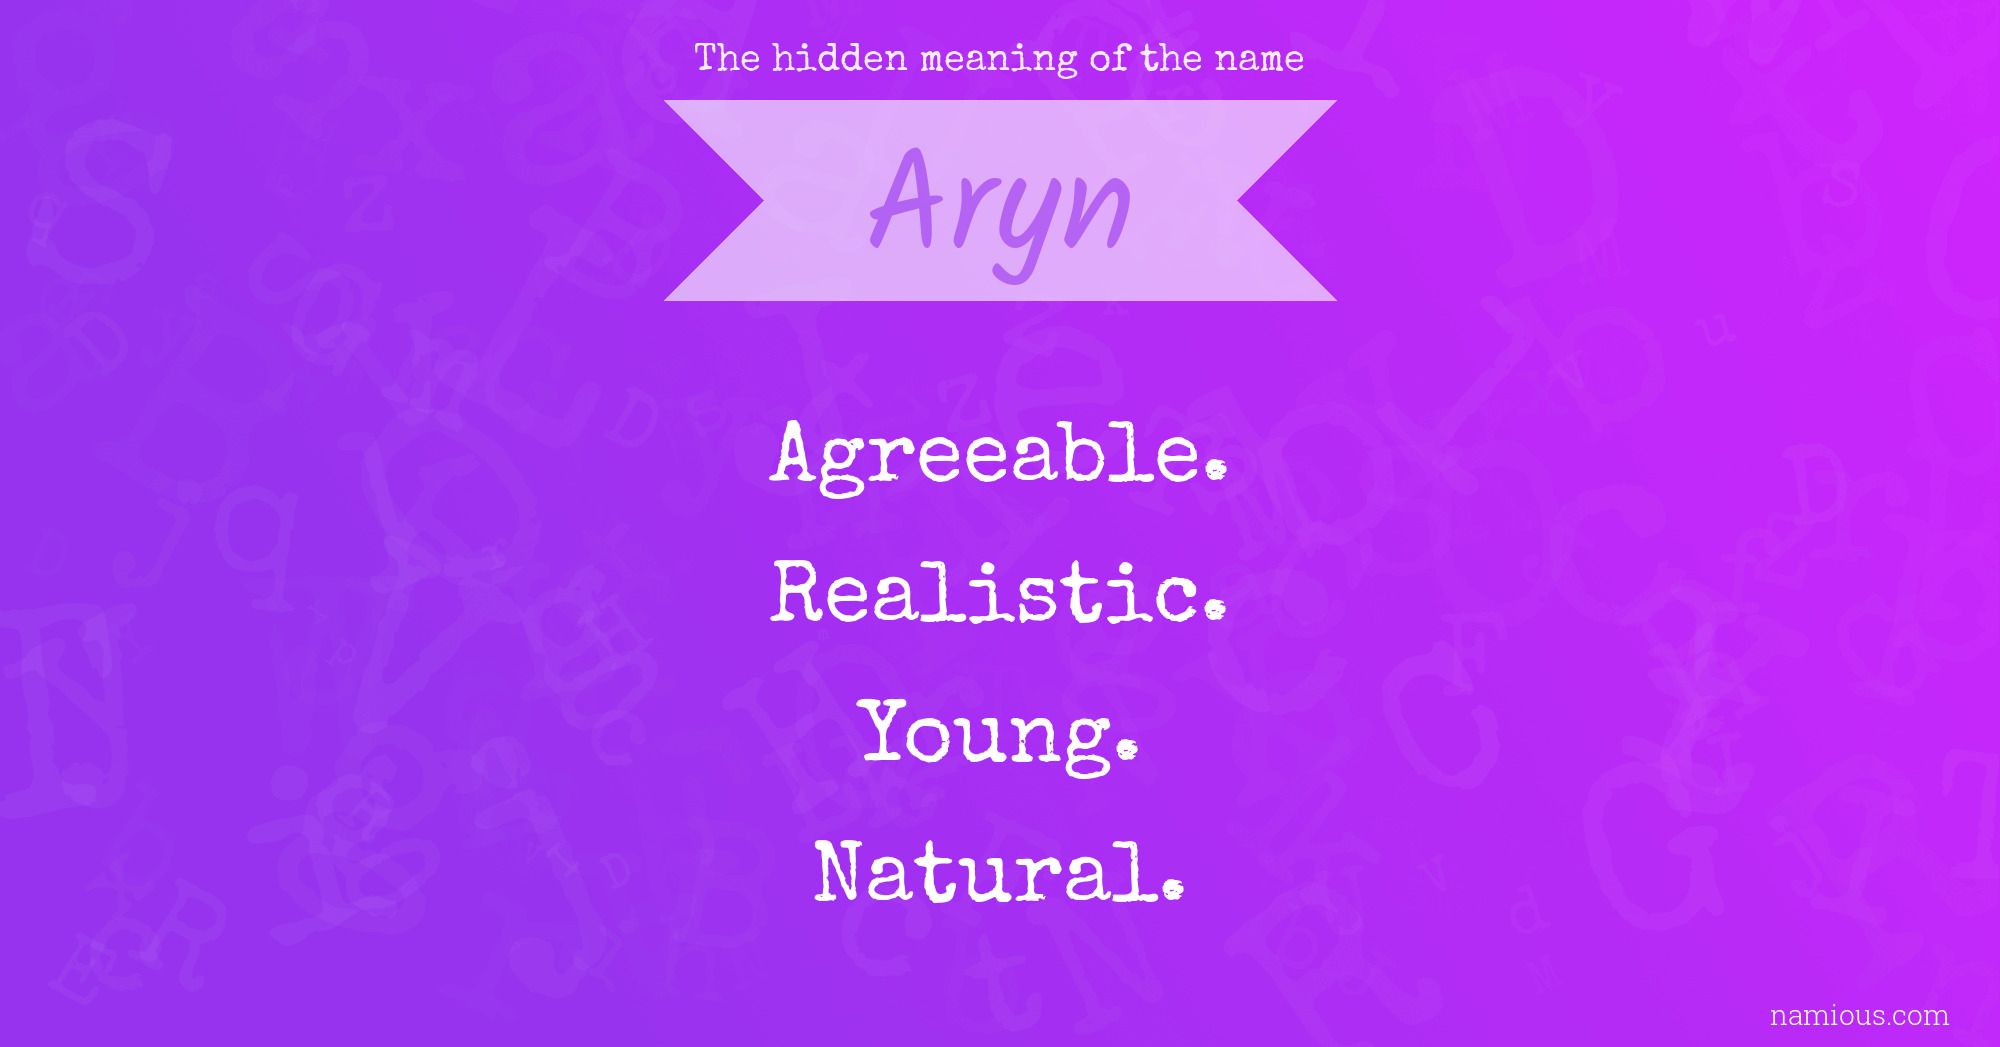 The hidden meaning of the name Aryn